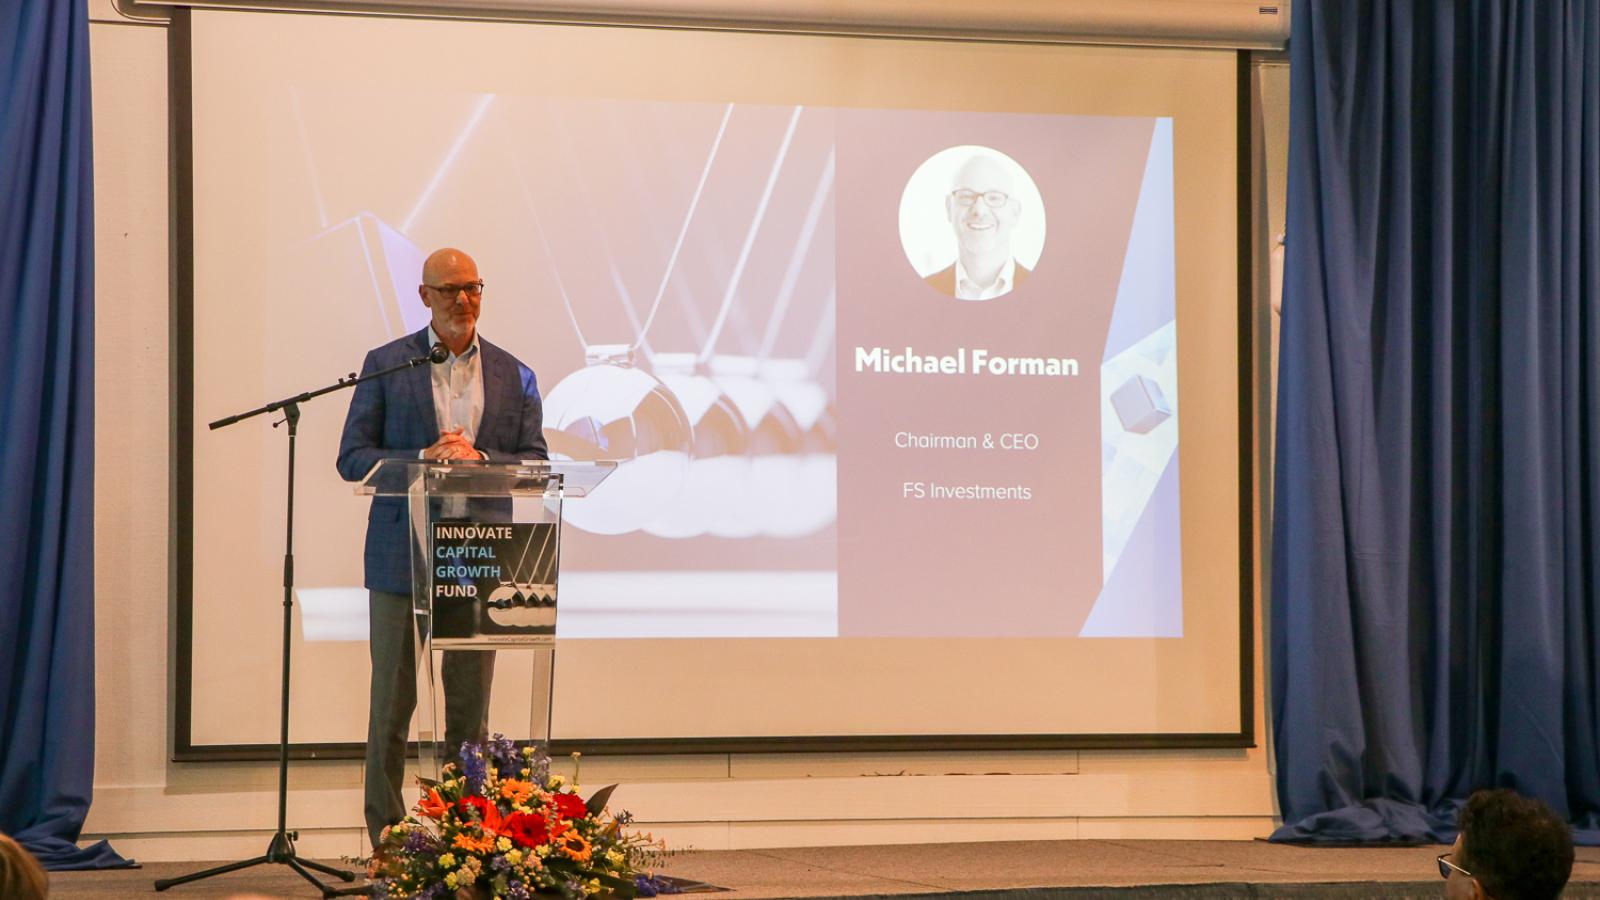 Michael Forman speaks at Innovate Capital Growth Fund Launch